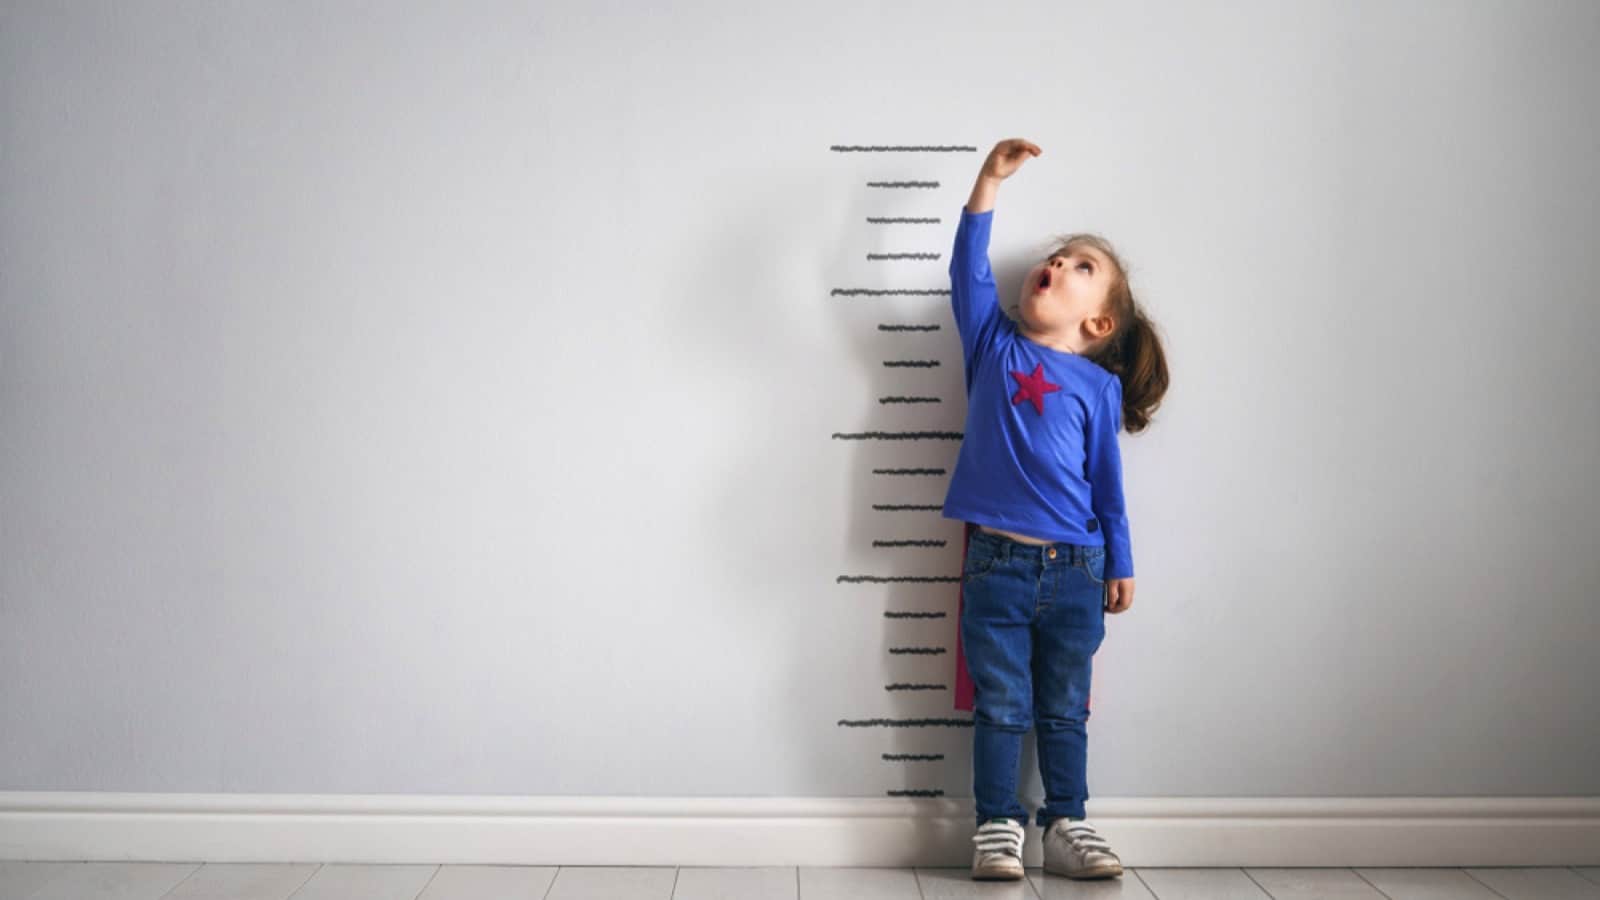 Child measuring height